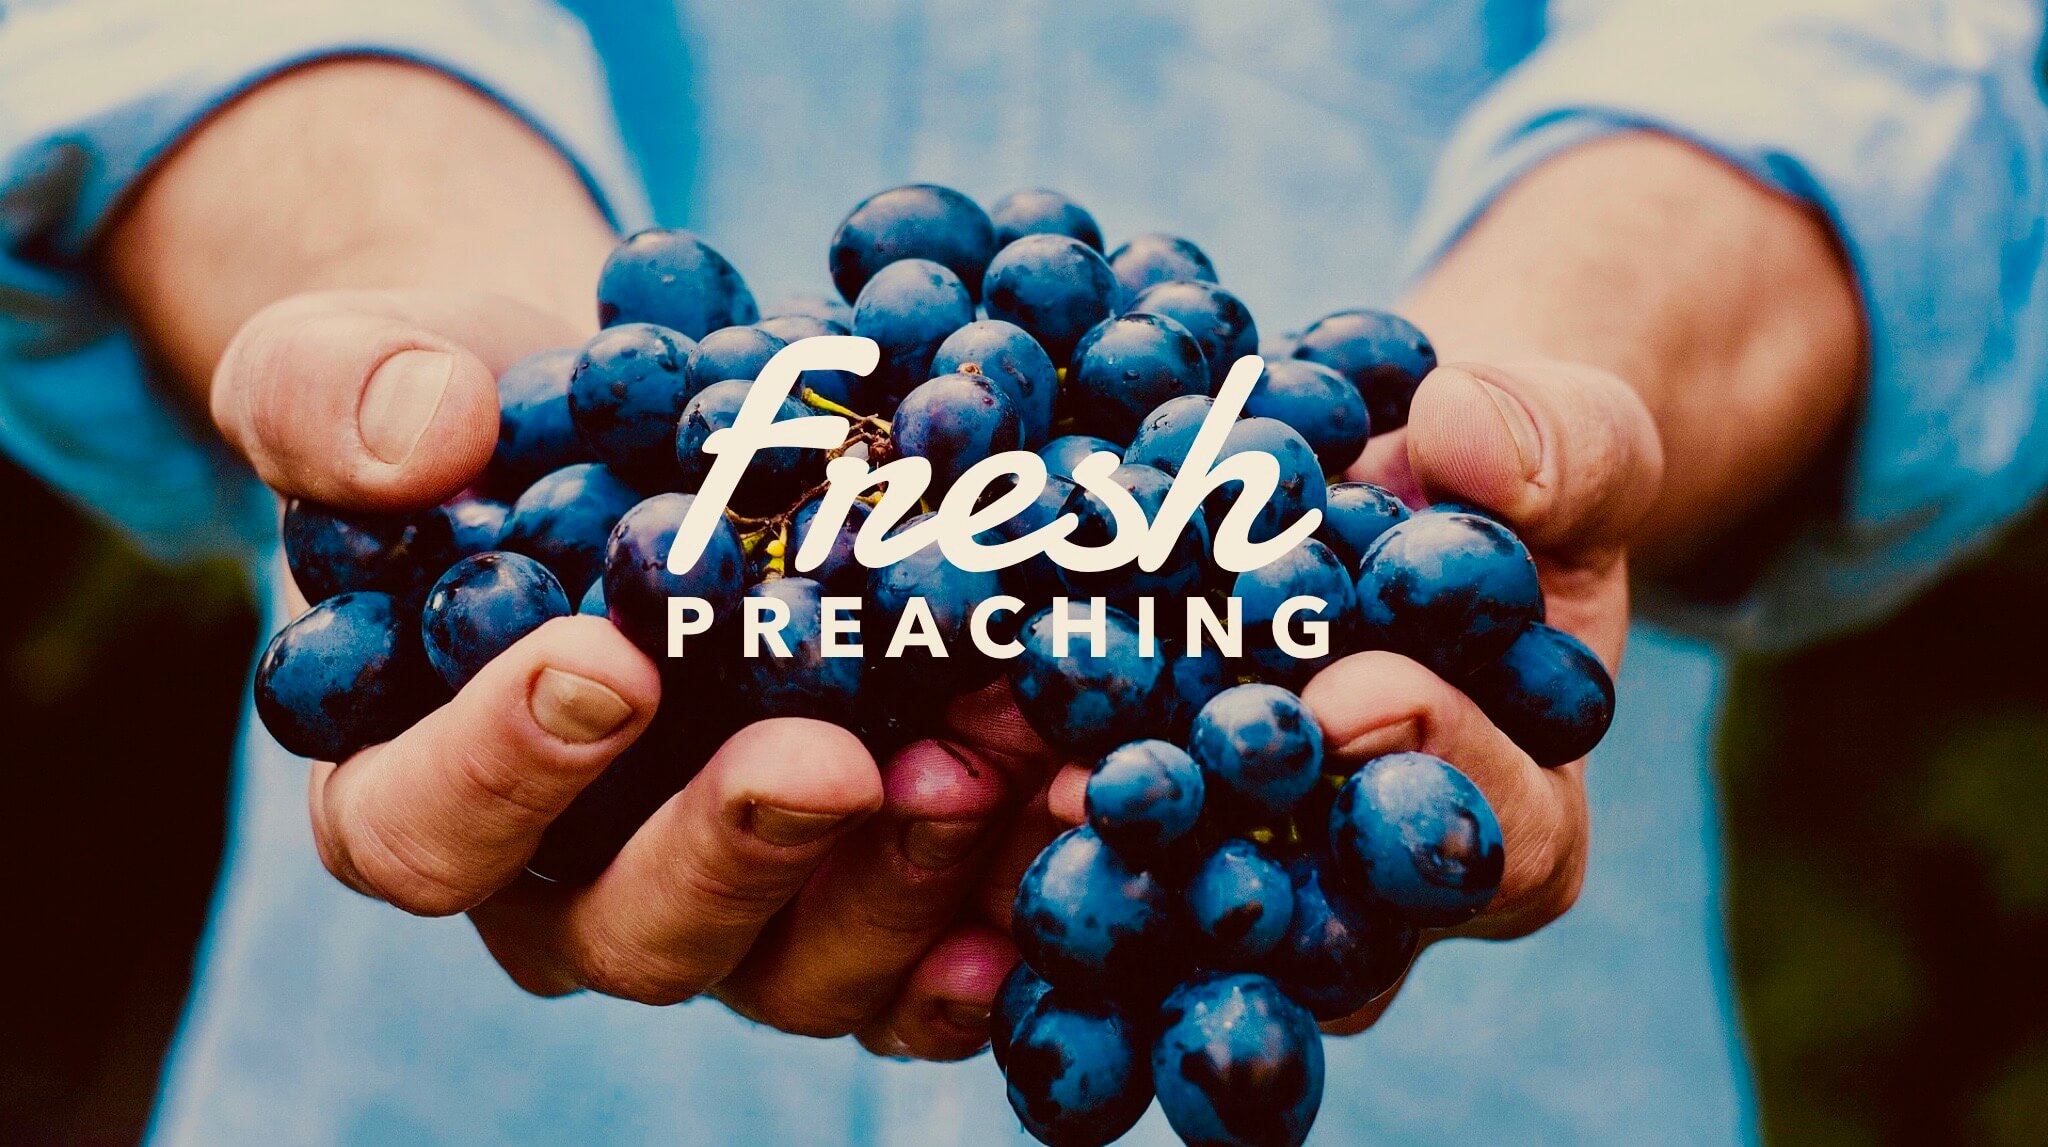 How to Keep Your Preaching Fresh